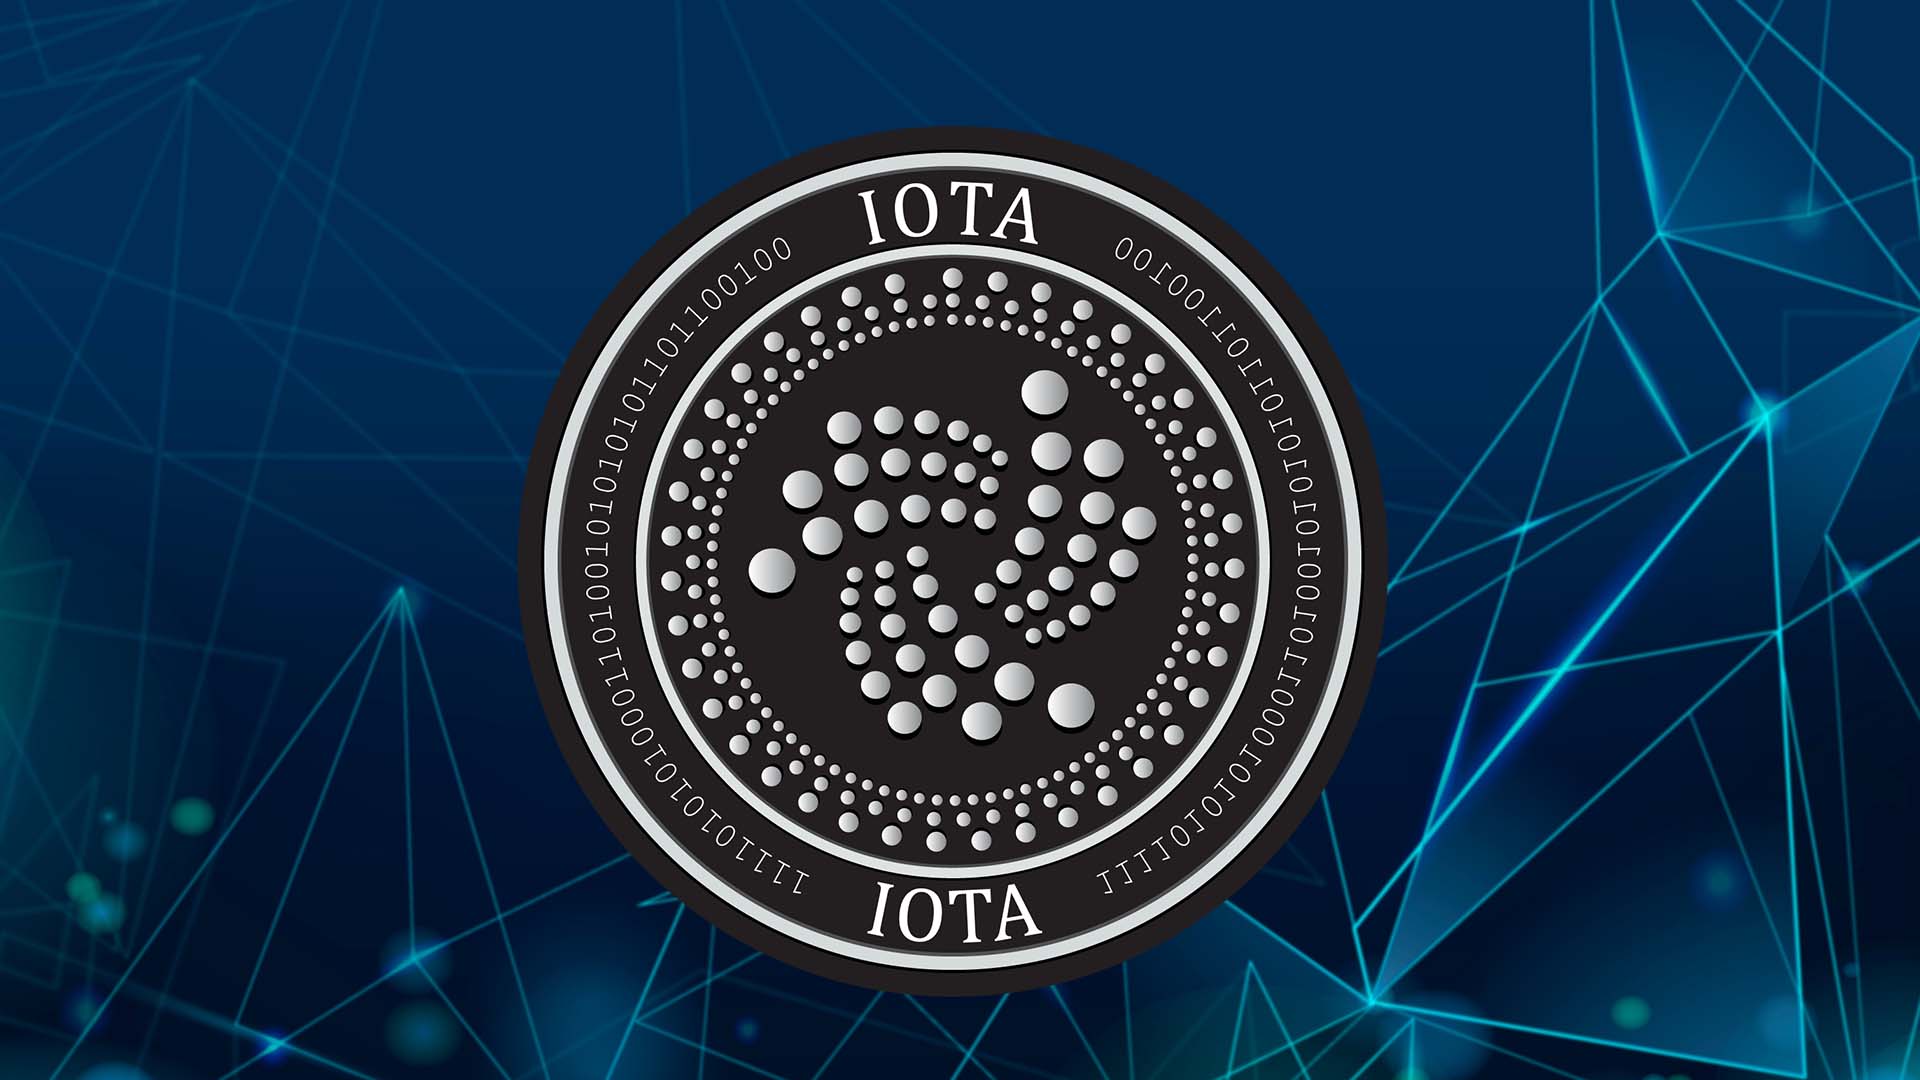 Step by step, IOTA up the ladder- gainer among the losers